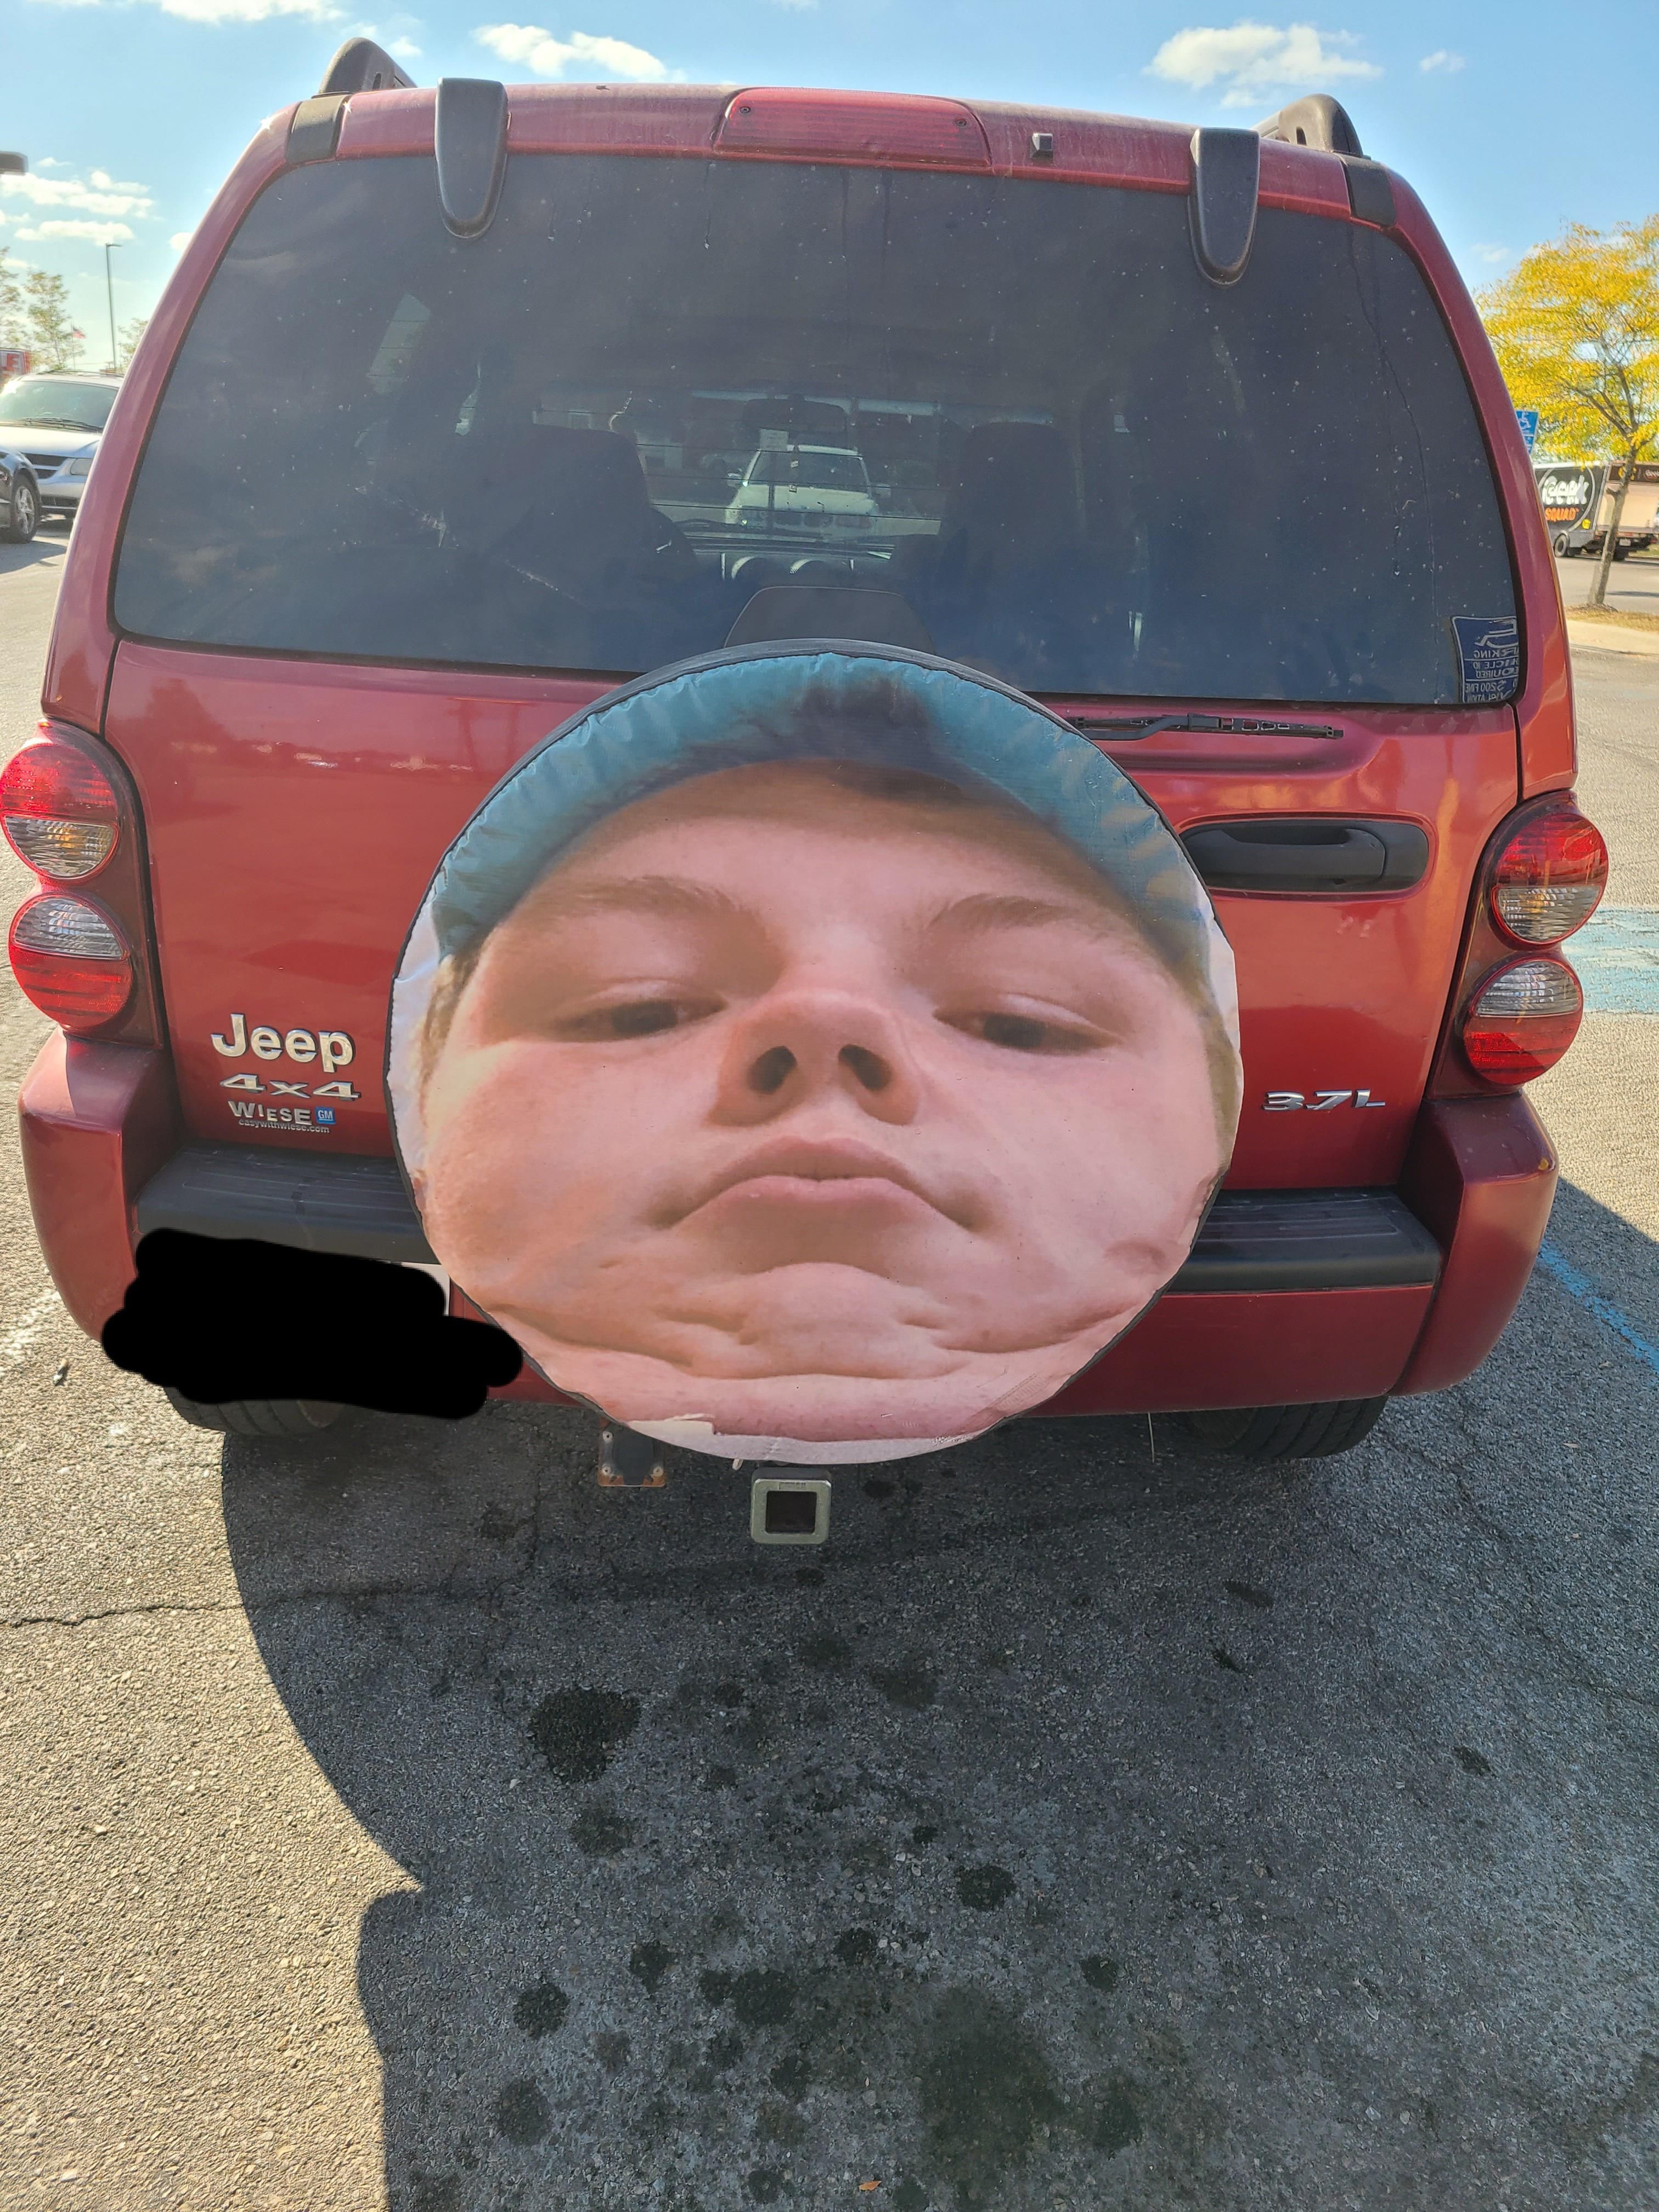 This brave man made a tire cover that absolutely kills me